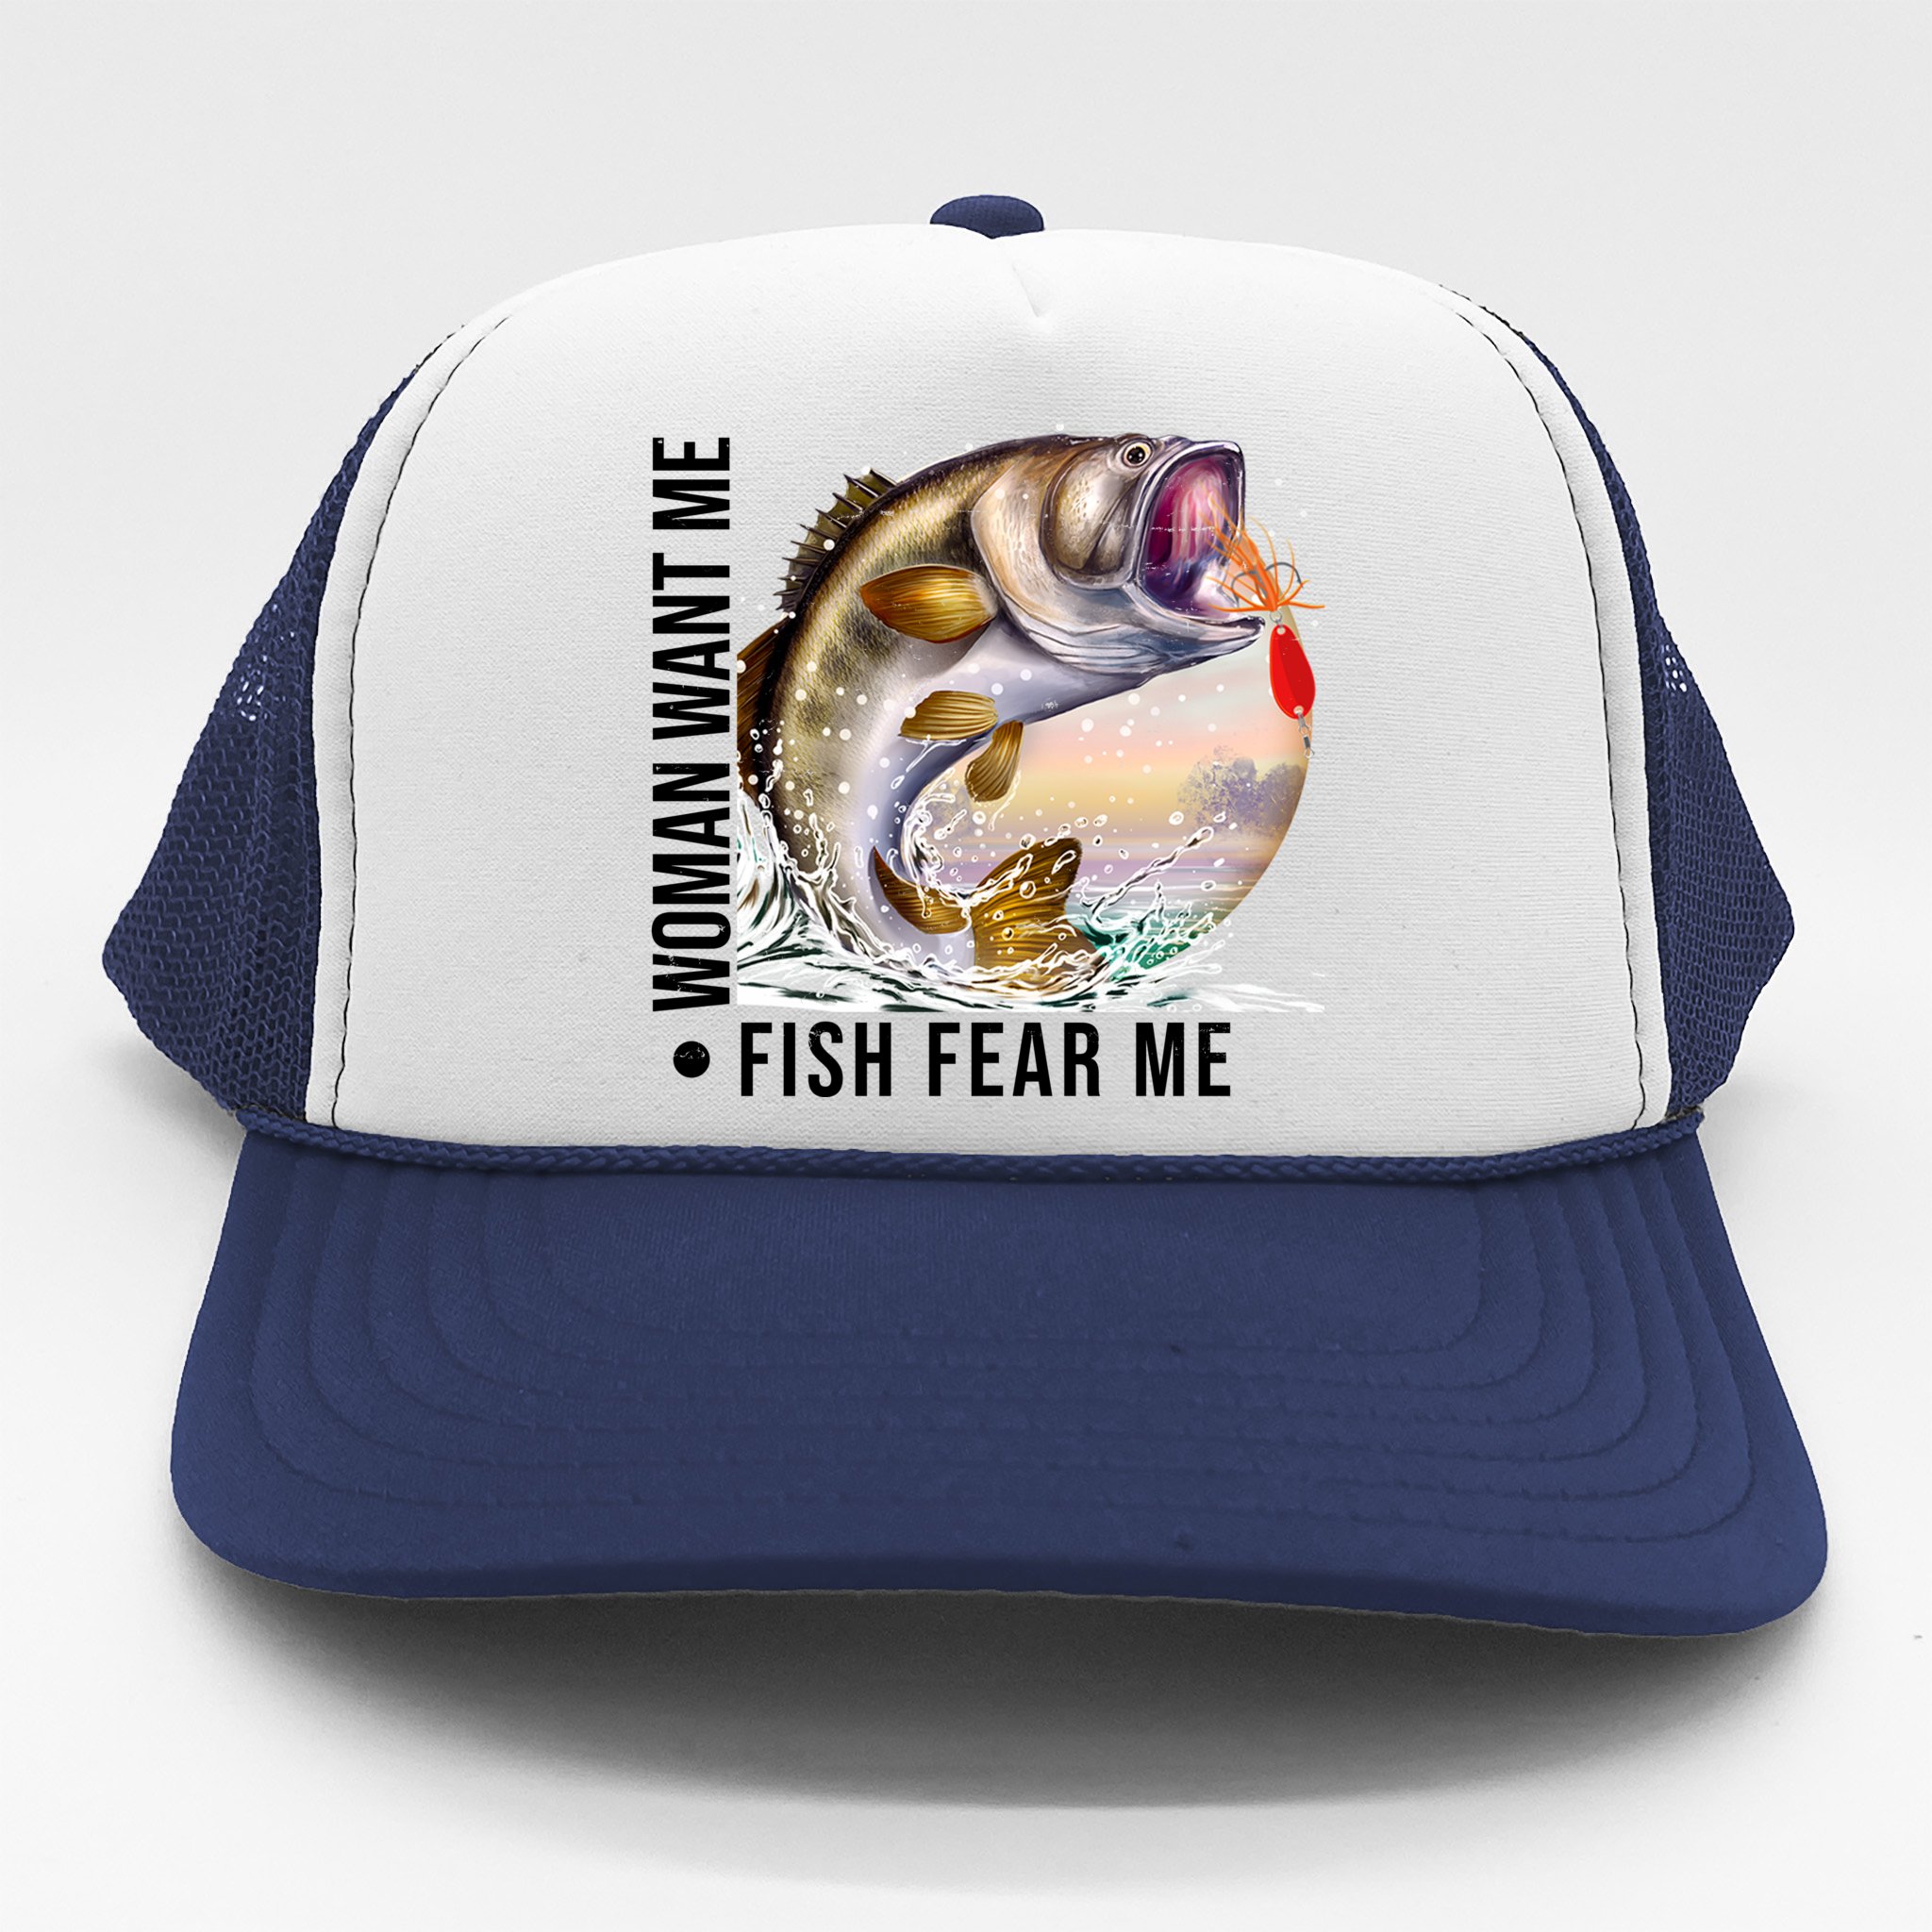 https://images3.teeshirtpalace.com/images/productImages/wwm6713172-women-want-me-fish-fear-me-bass-fisherman-funny--navy-th-garment.jpg